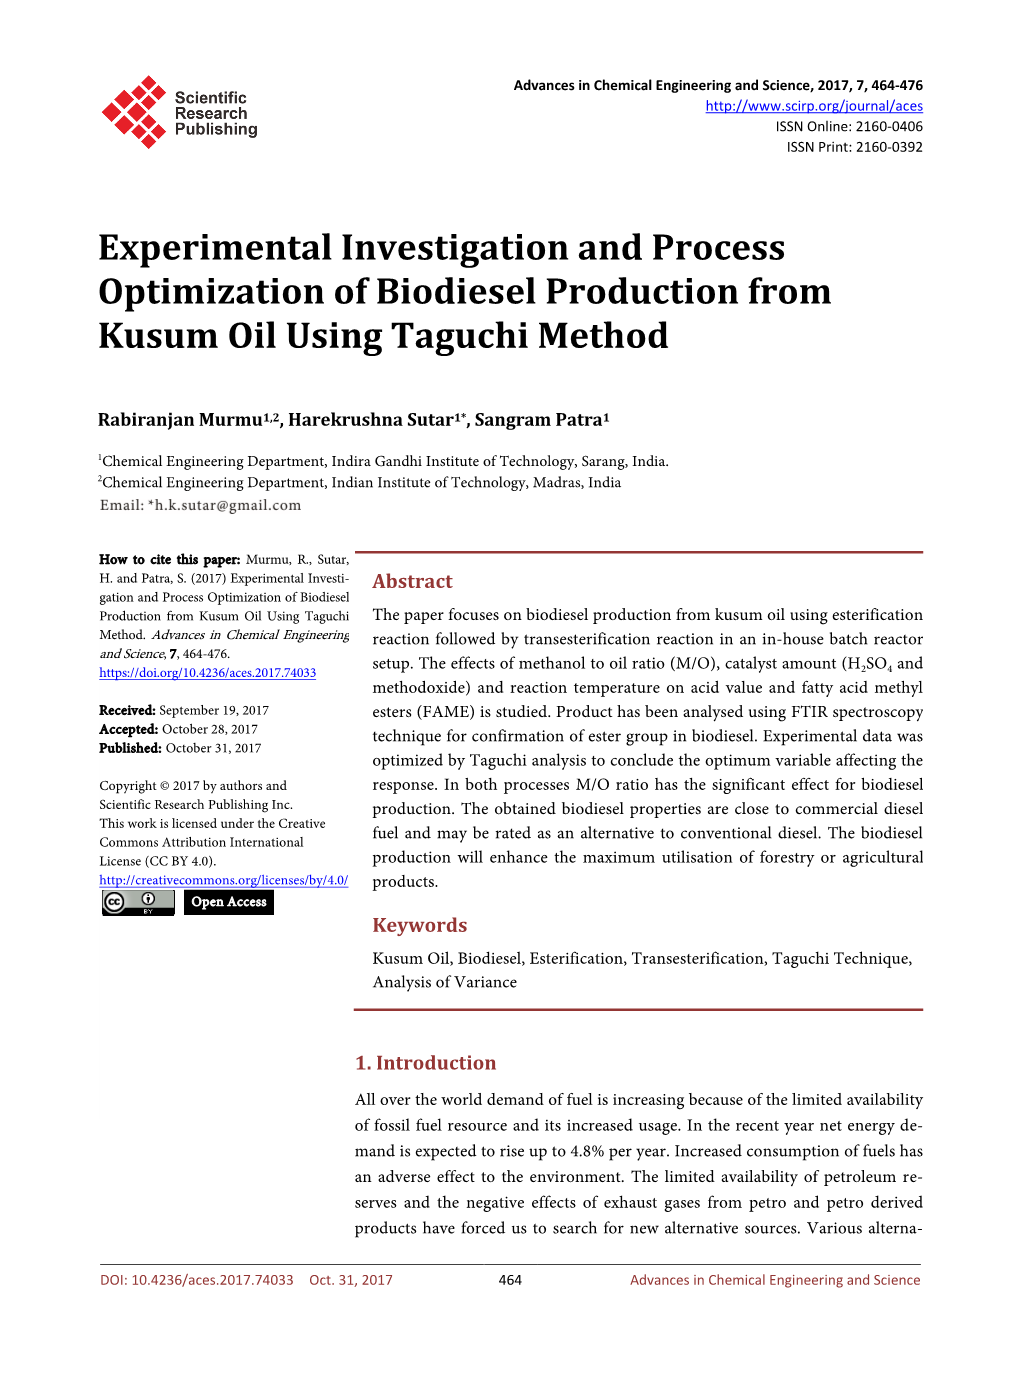 Experimental Investigation and Process Optimization of Biodiesel Production from Kusum Oil Using Taguchi Method